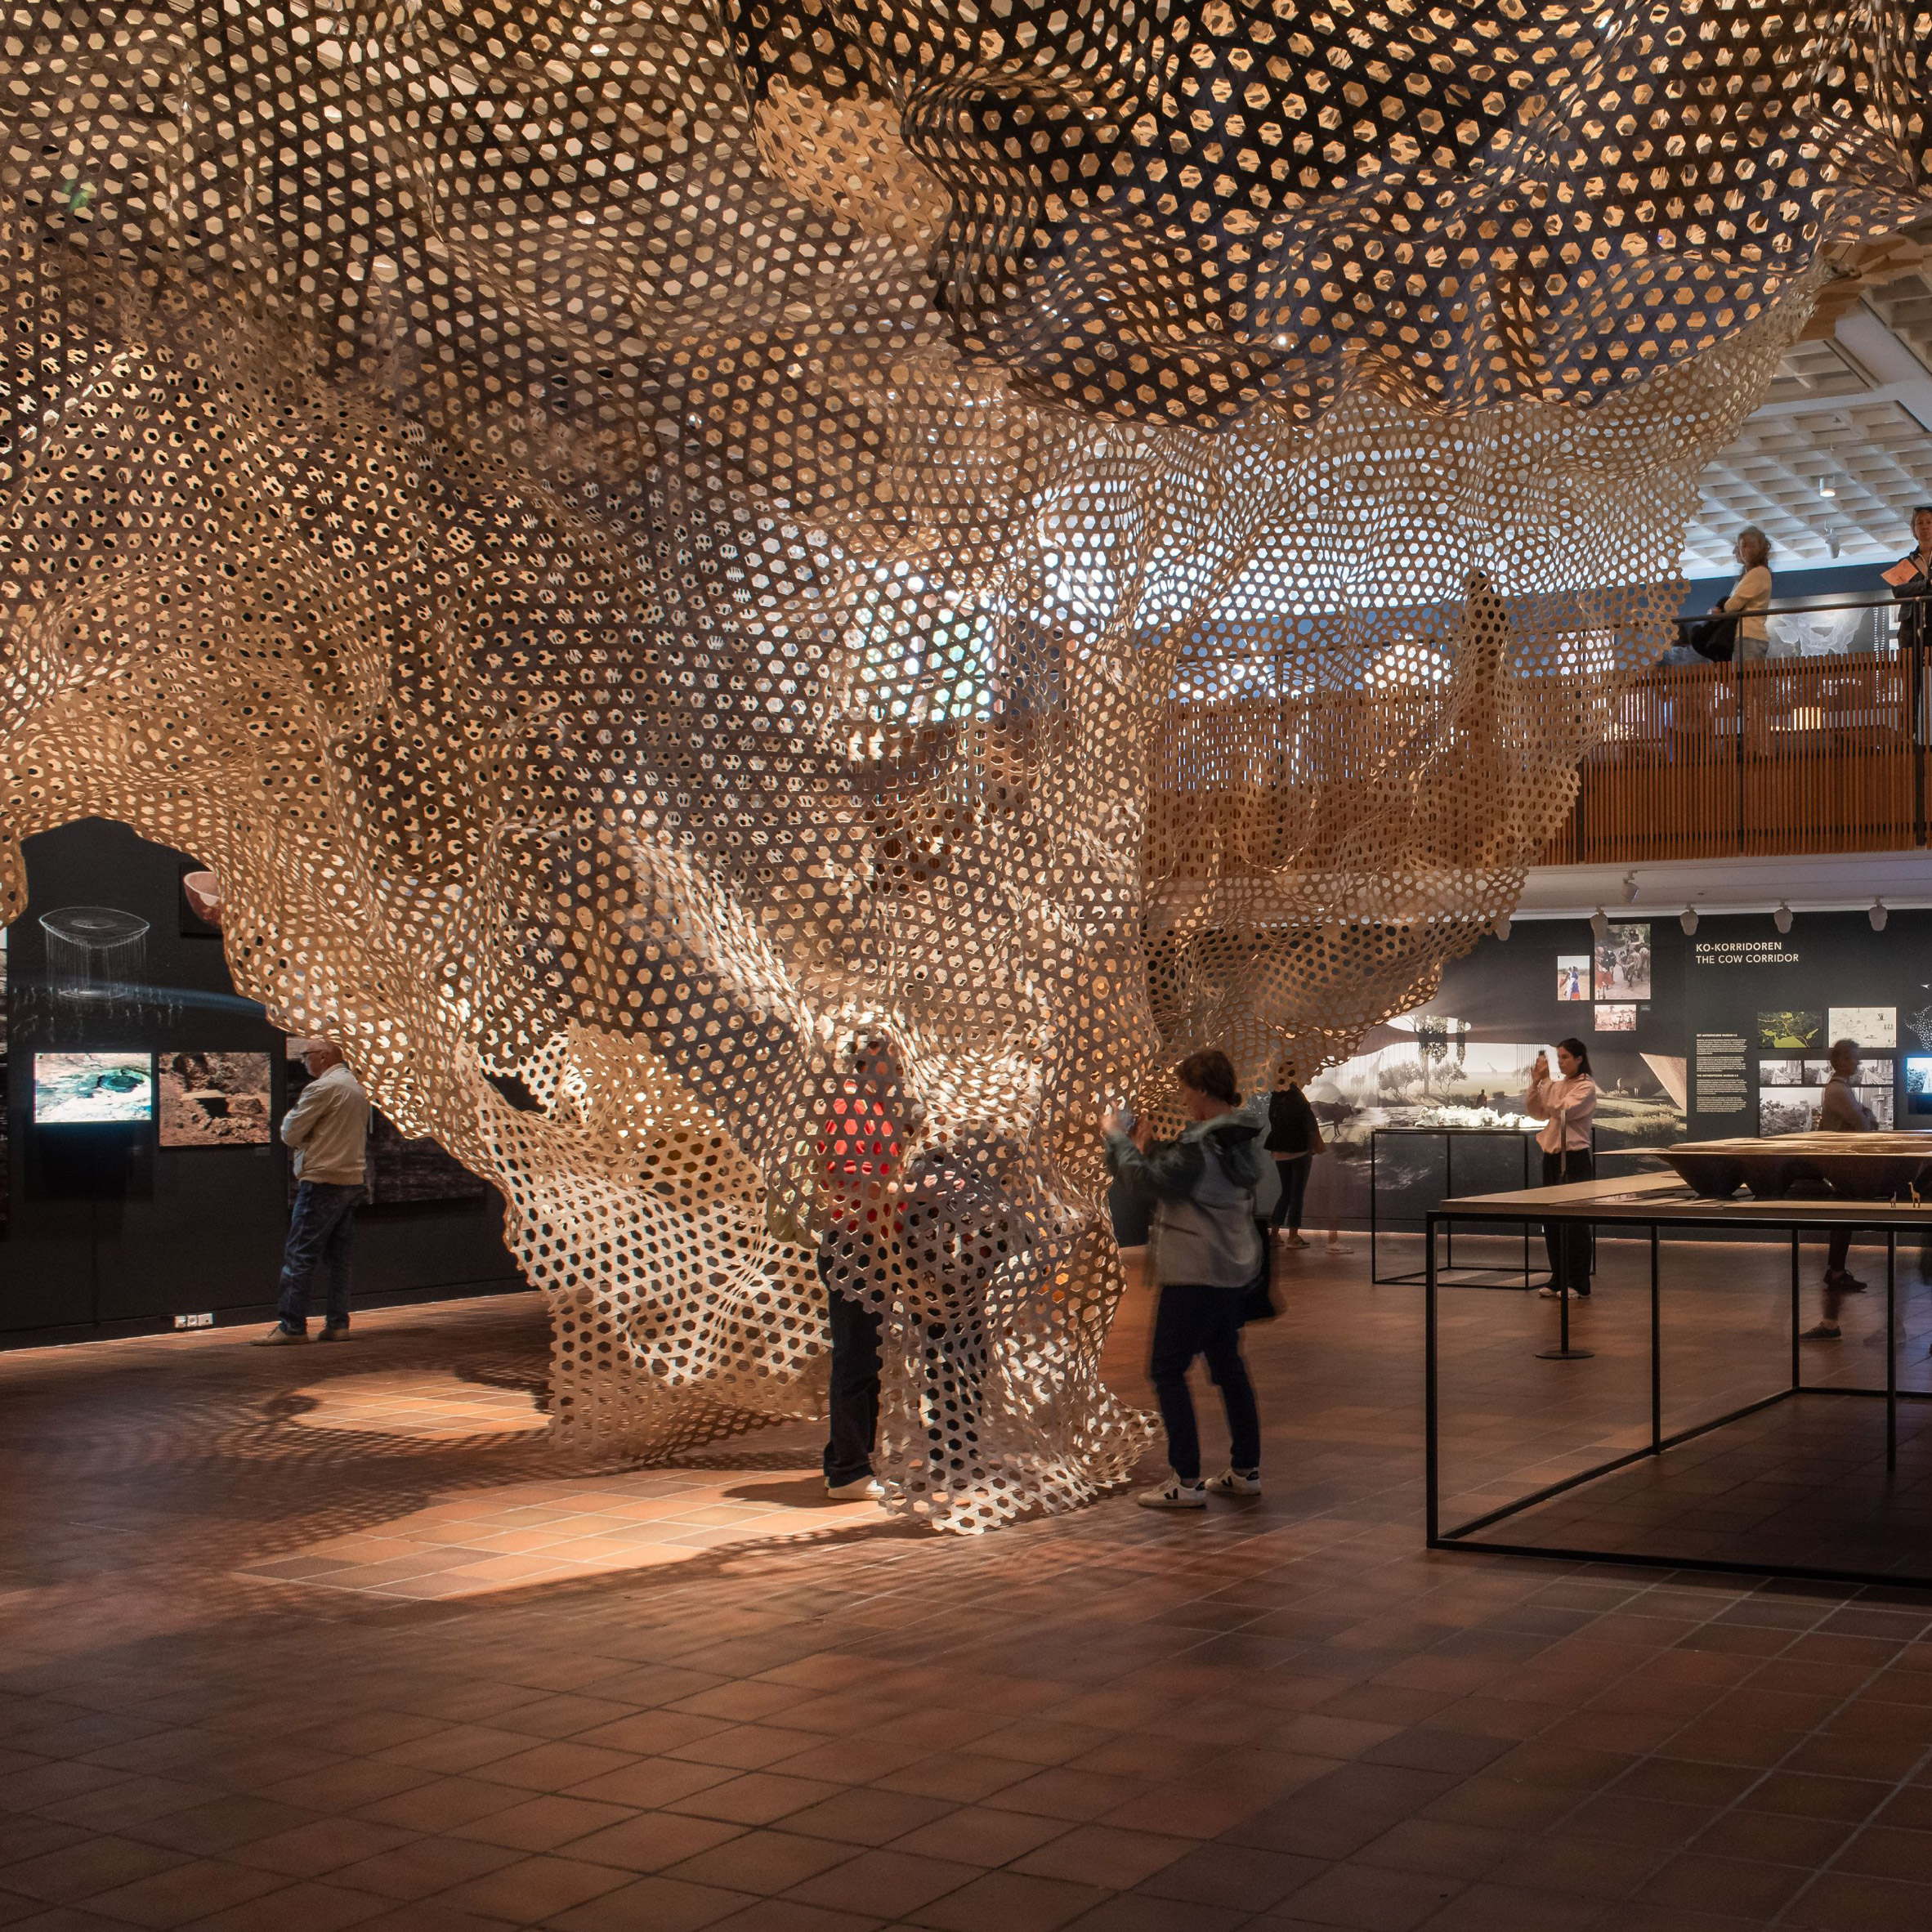 Image of visitors interacting with the mesh installation of the cave